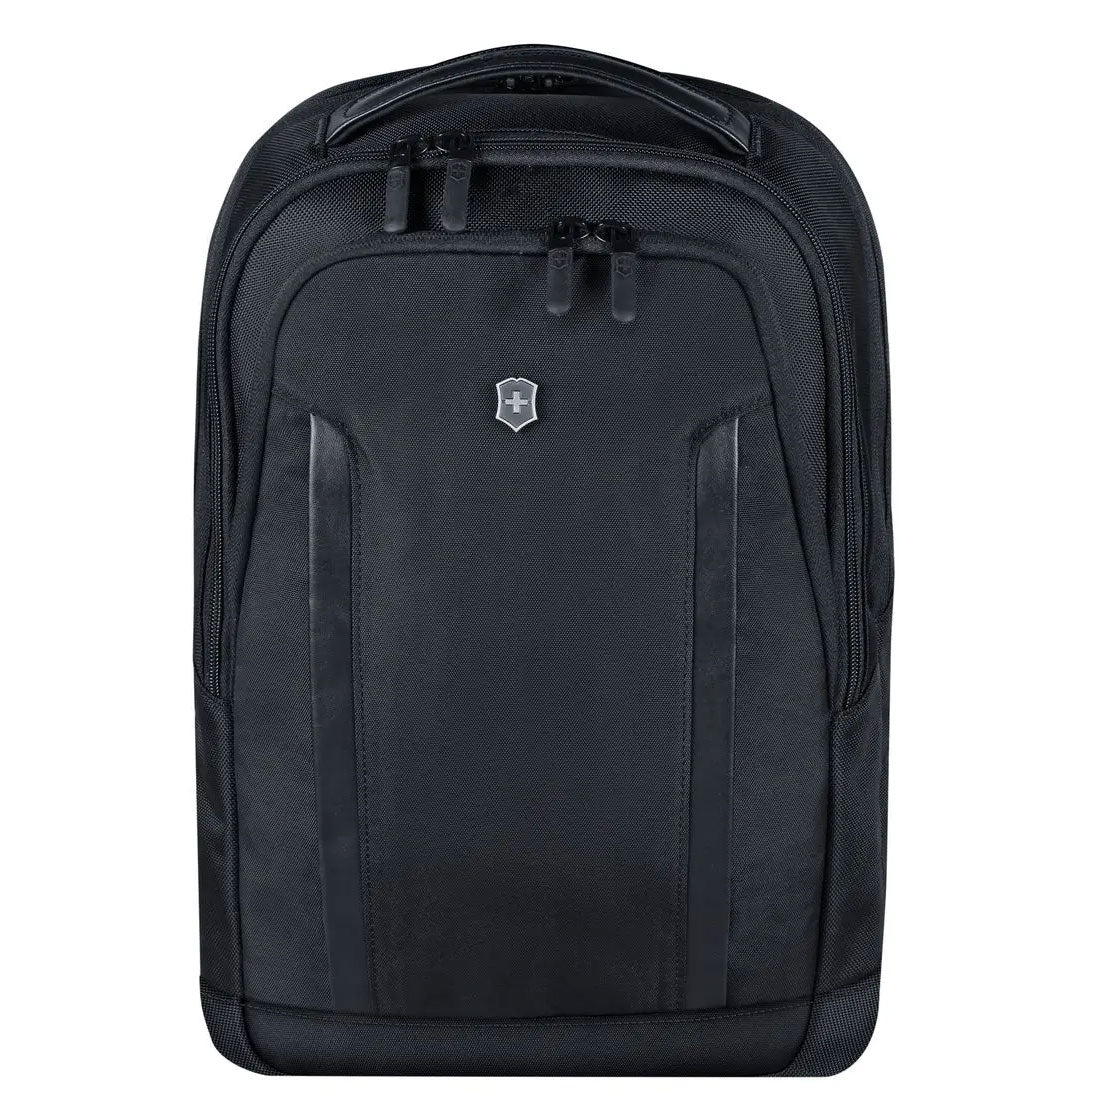 Victorinox Swiss Army Altmont Professional Compact Laptop Backpack